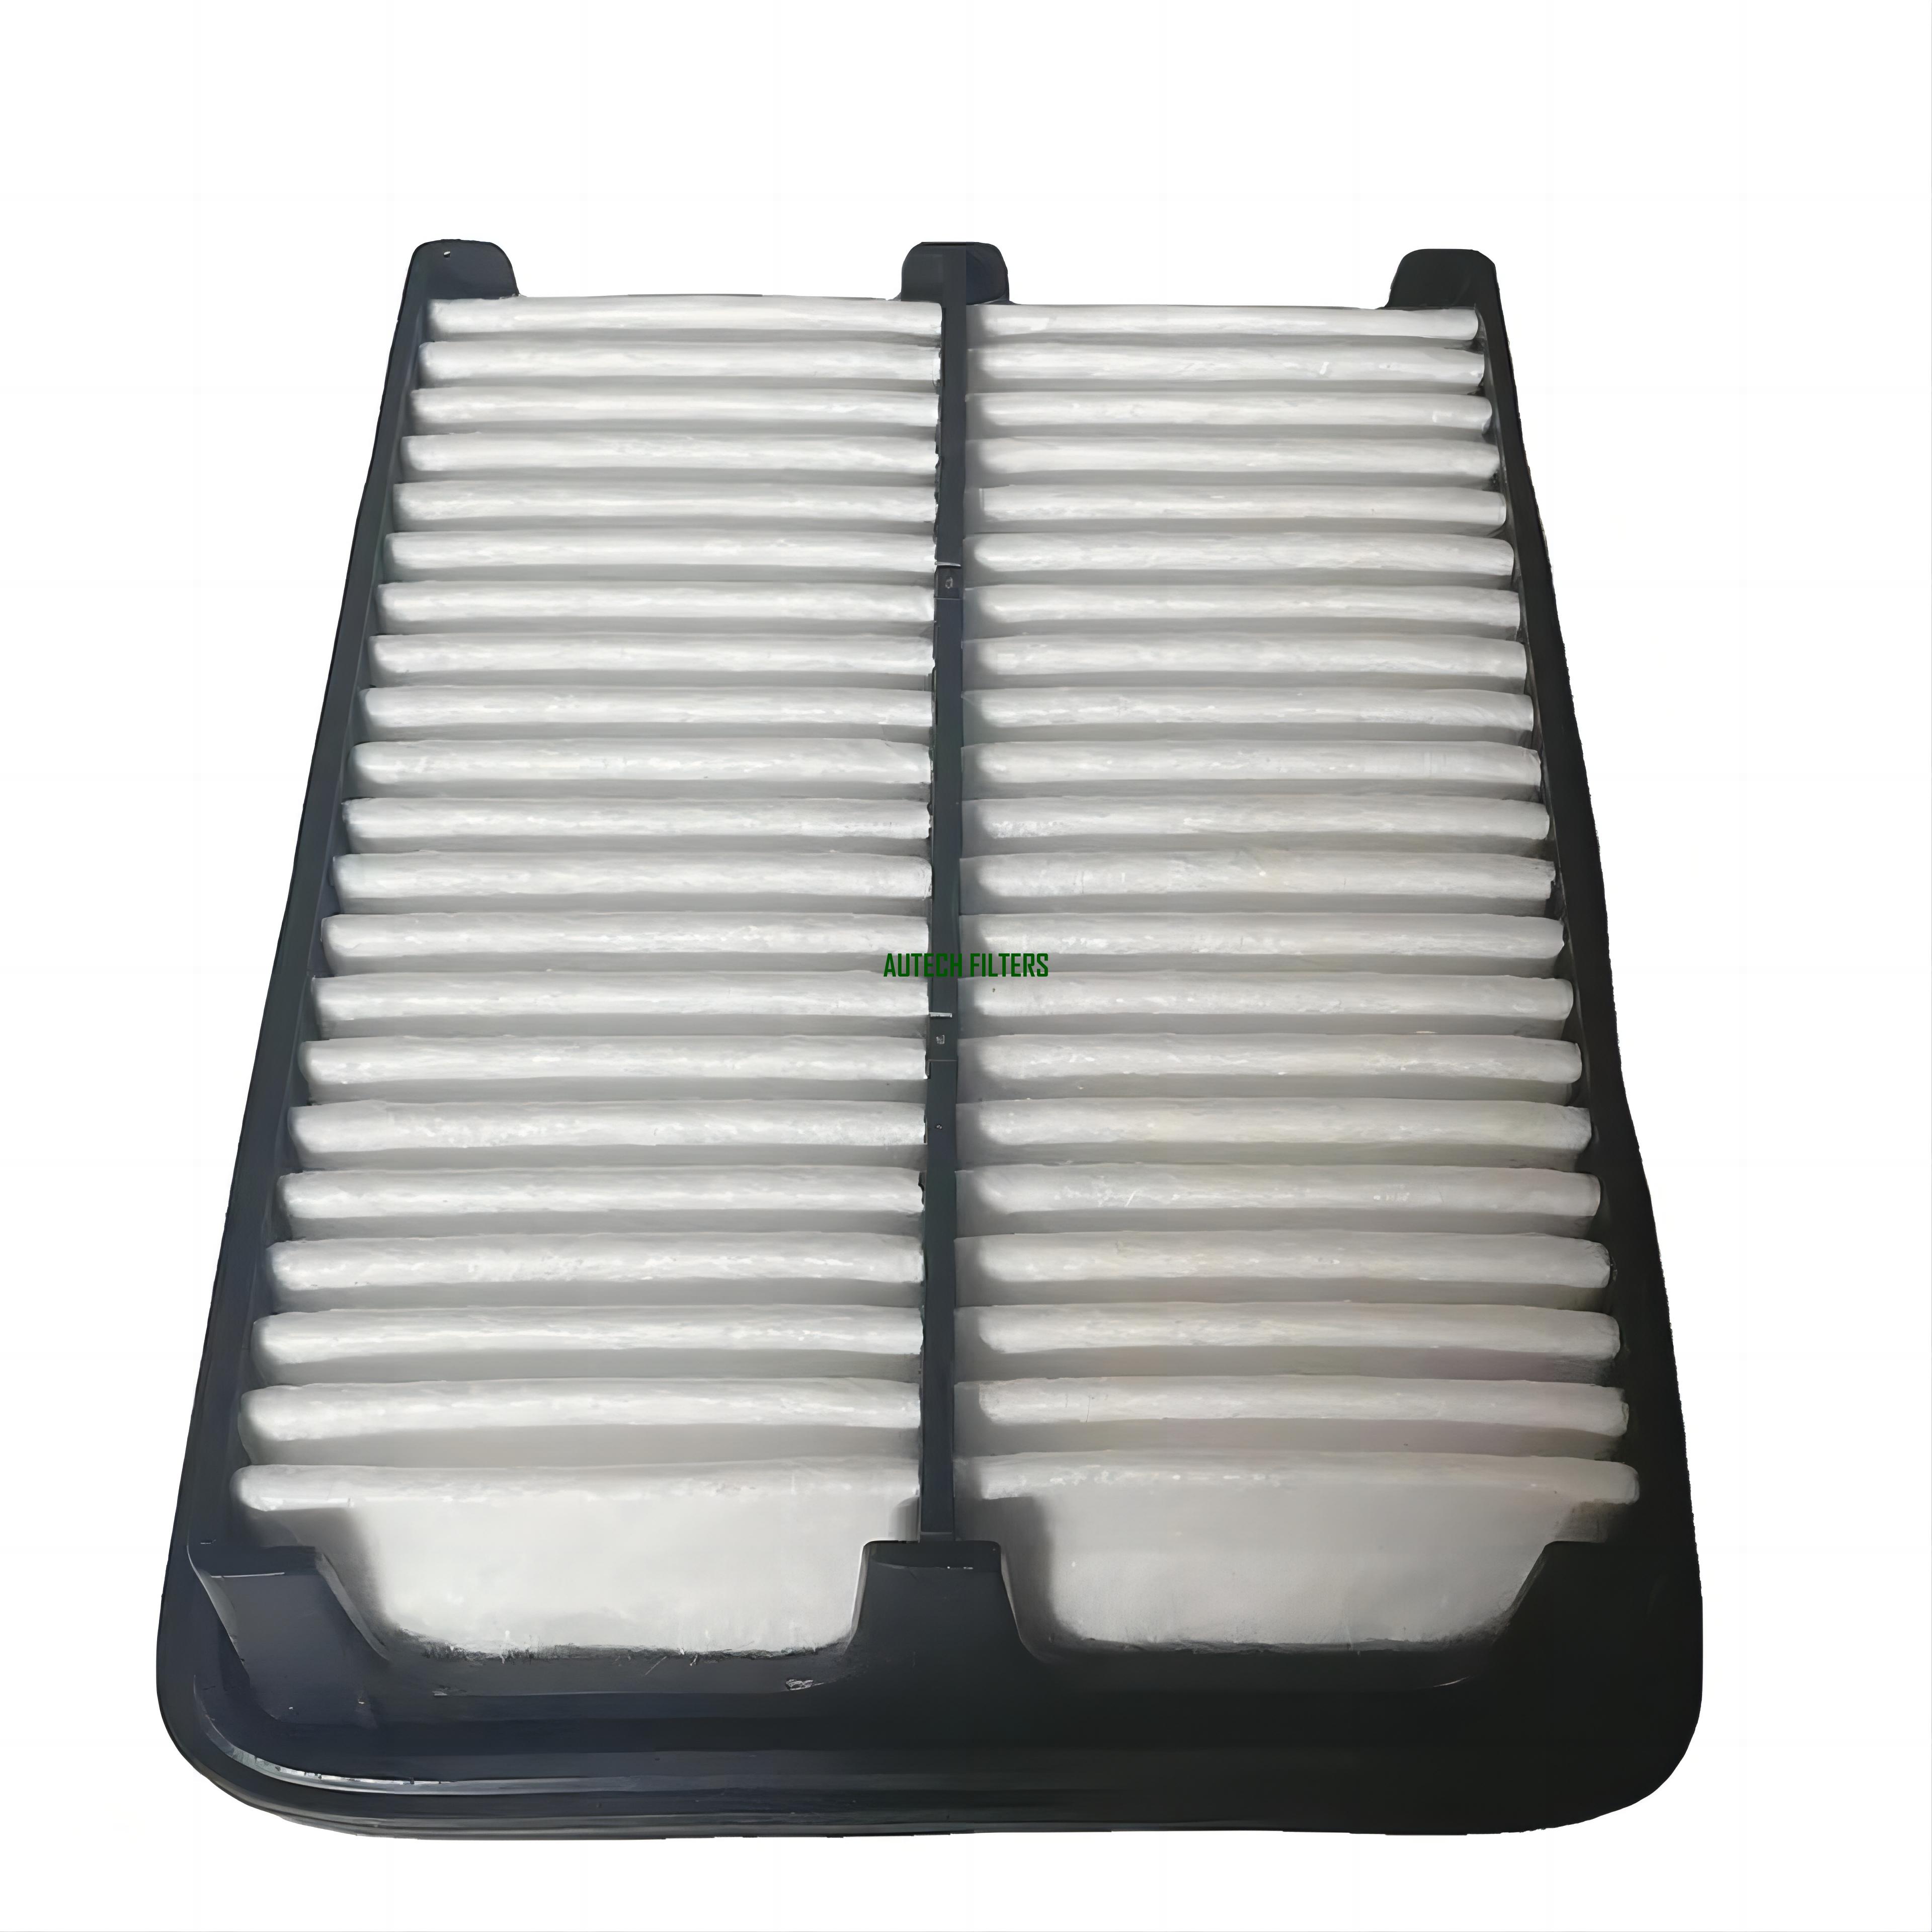 P501-13-3A0 Air Filter for MAZDA 2-3-CX3 DESDE 2015 1.5